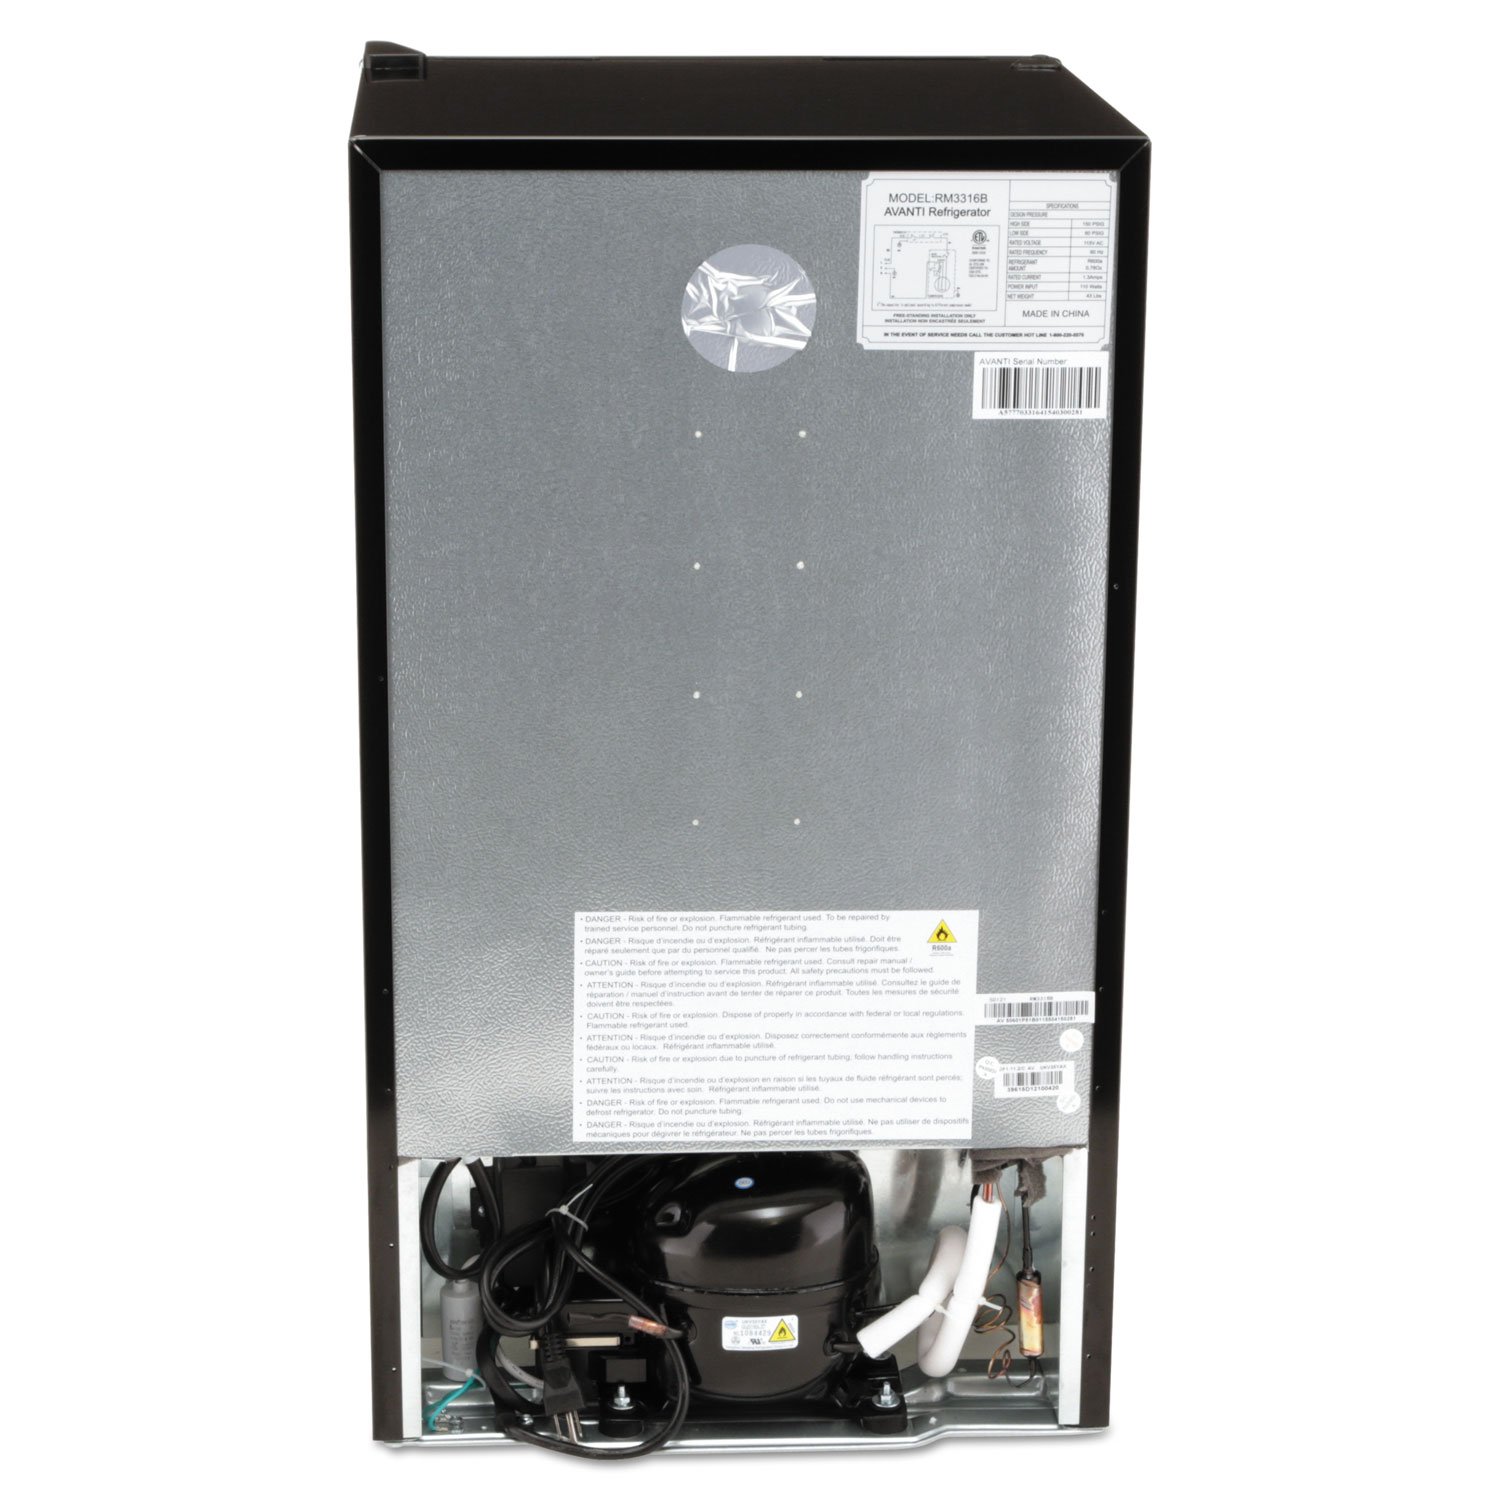 Avanti RM3316B 3.3 Cu.Ft Refrigerator with Chiller Compartment, Black